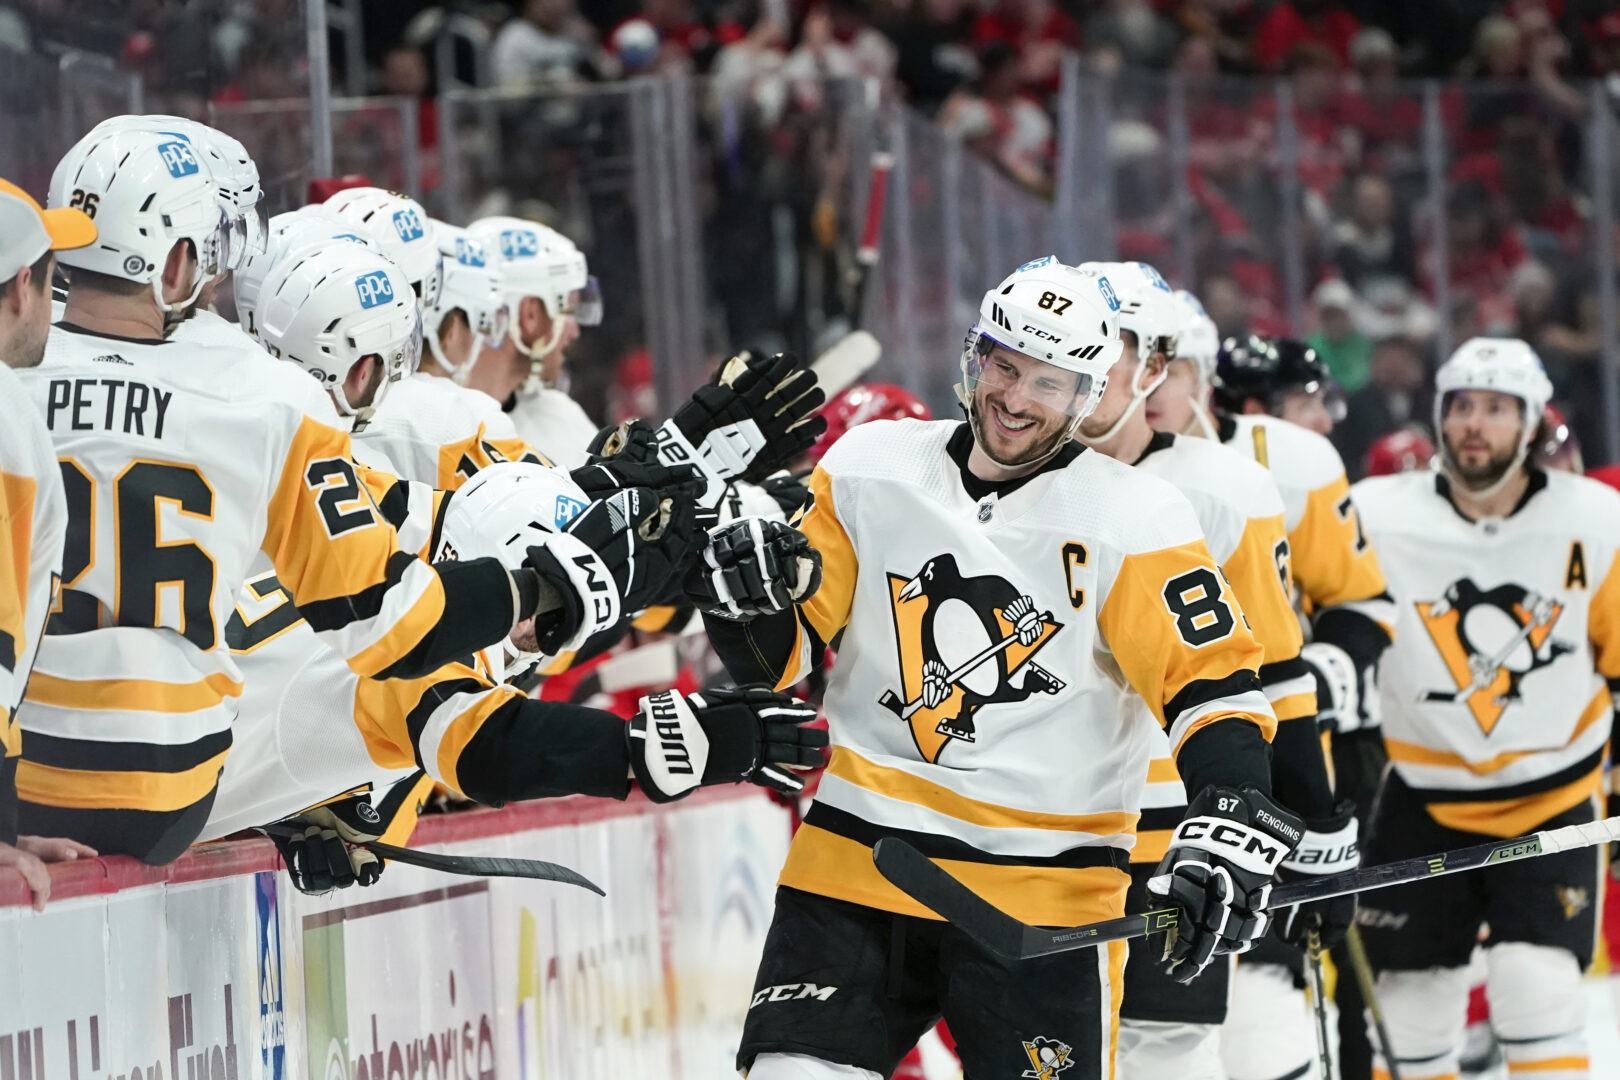 Pittsburgh Penguins center Sidney Crosby (87) smiles as he celebrates his goal against the Detroit Red Wings in the third period of an NHL hockey game Saturday, April 8, 2023, in Detroit. (AP Photo/Paul Sancya)